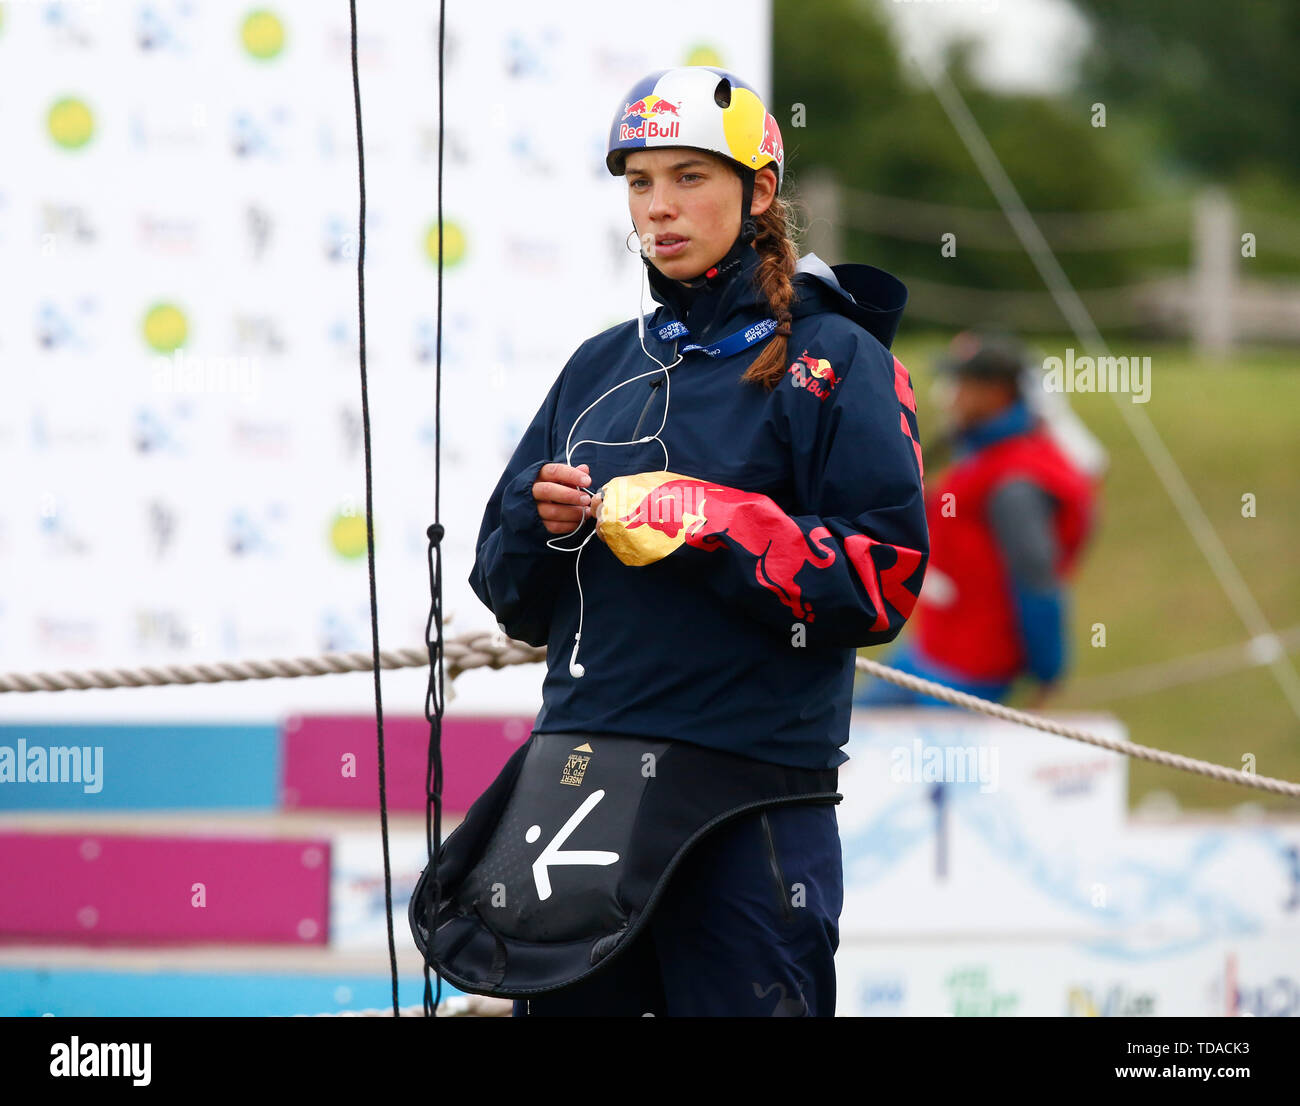 London, UK. 14th June, 2019. LONDON, ENGLAND JUNE 14 Viktoria Wolffhardt (AUT) Compete in Women Kayak 1st Heat during 2019 ICF Canoe Slalom World Cup 1 at the Lee Valley White Water Centre, London on 14 June 2019 Credit: Action Foto Sport/Alamy Live News Stock Photo